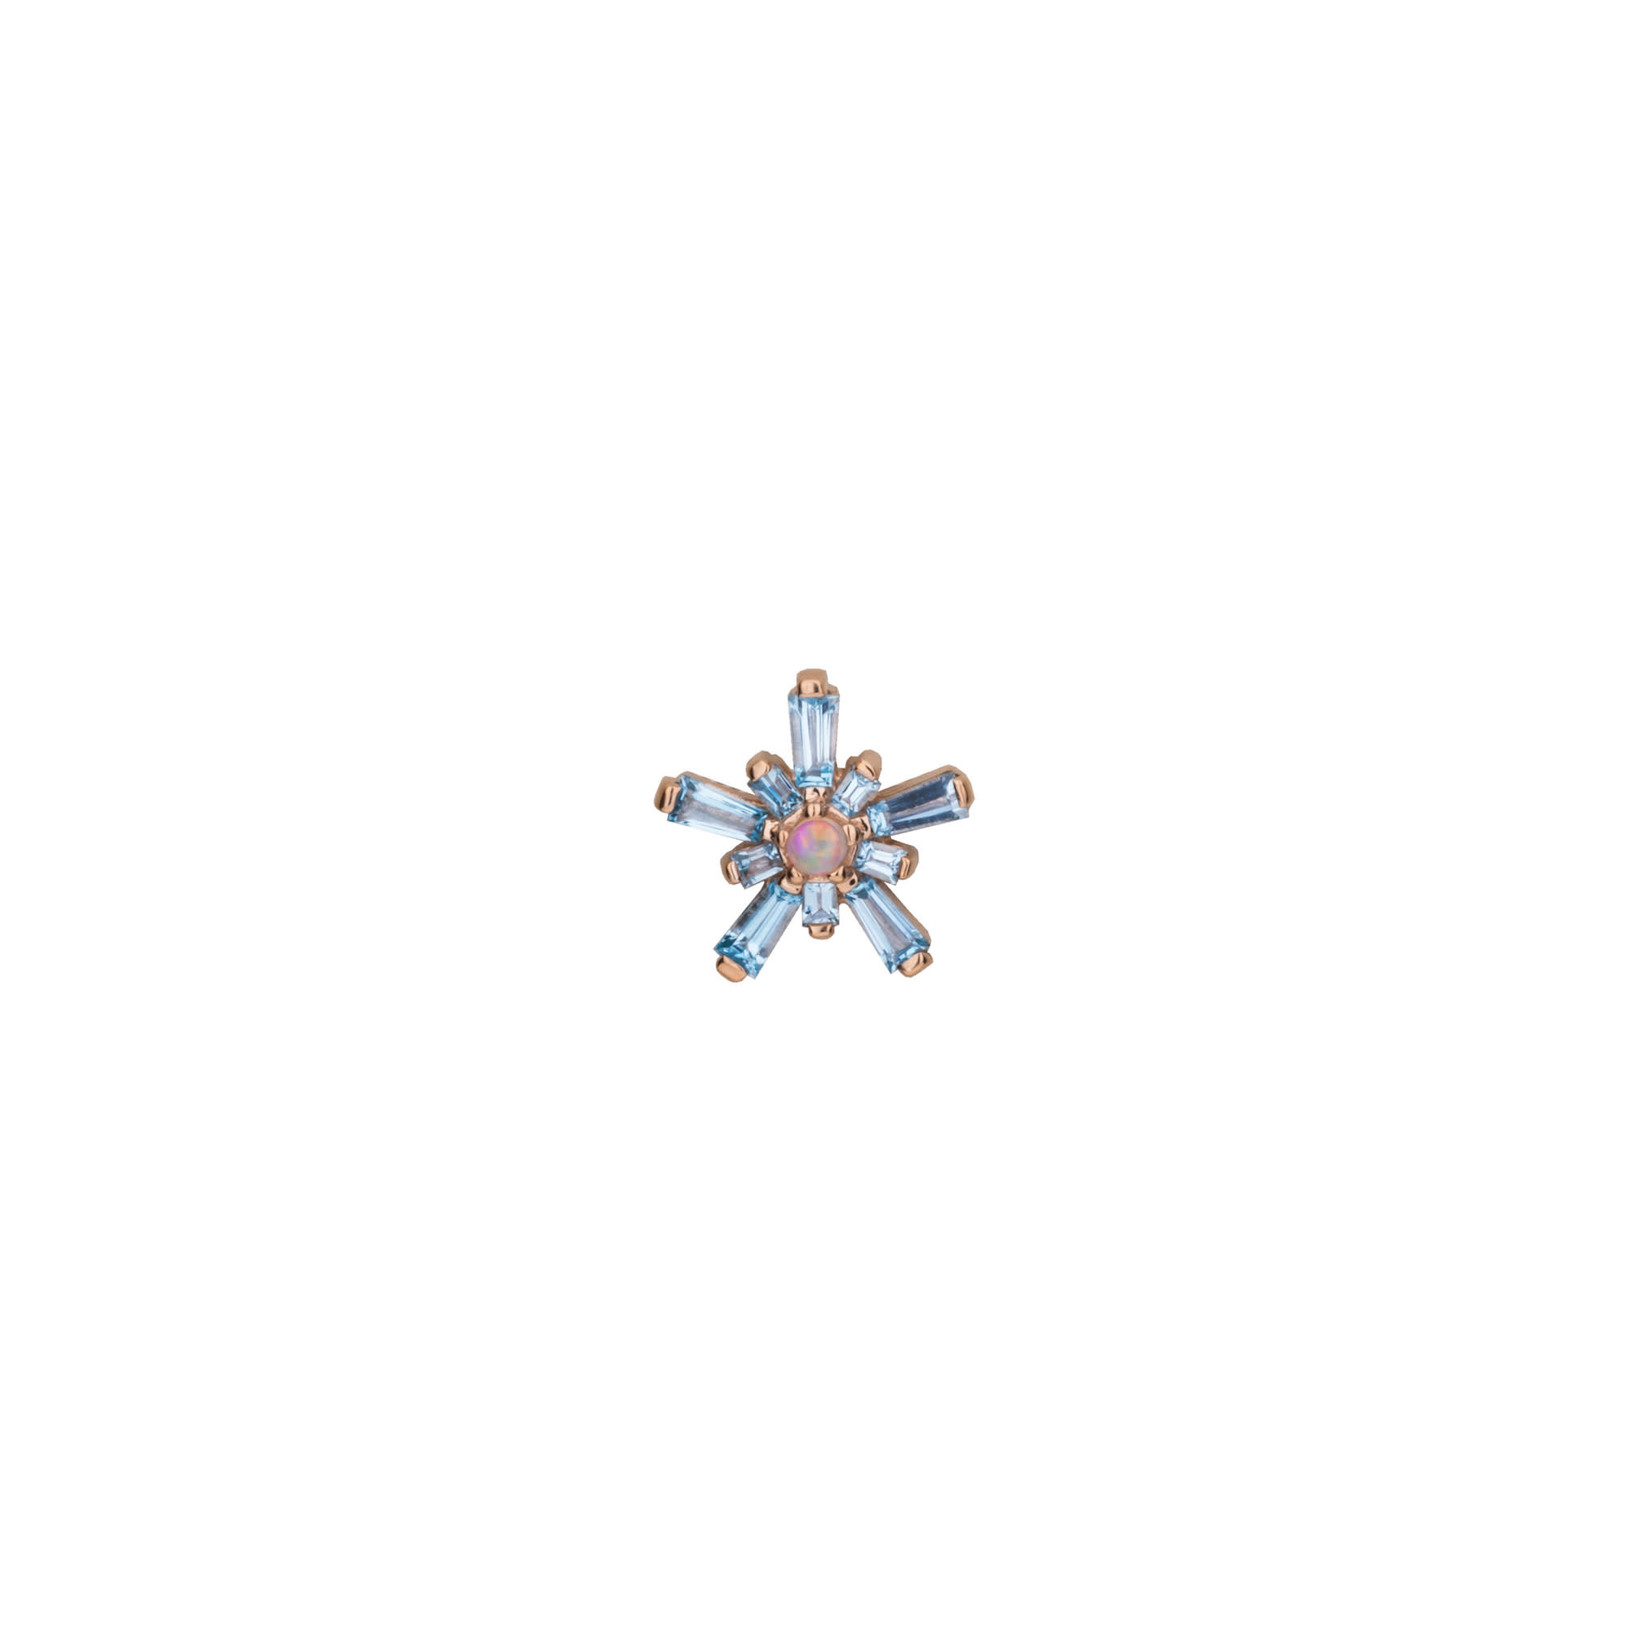 BVLA BVLA rose gold "Mininova" threaded end with 5x 3.5x1.3x1 Swiss topaz baguette, 5x 1.25x1.75 Swiss topaz baguette, and 1.5 AAA white opal